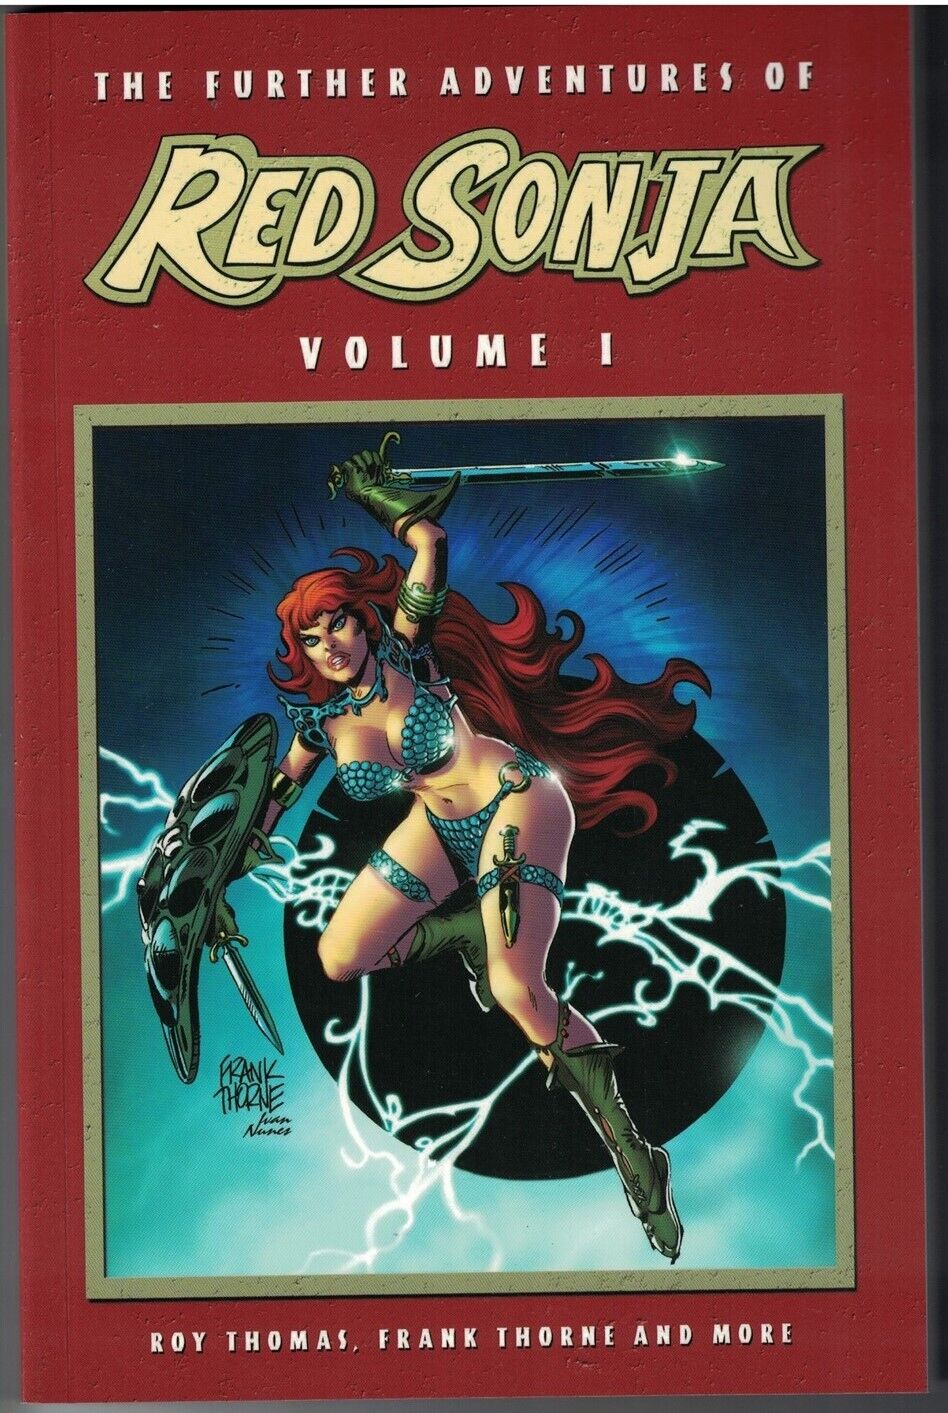 FURTHER ADVENTURES OF RED SONJA Vol 1 TP TPB $19.99srp Frank Thorne NEW NM